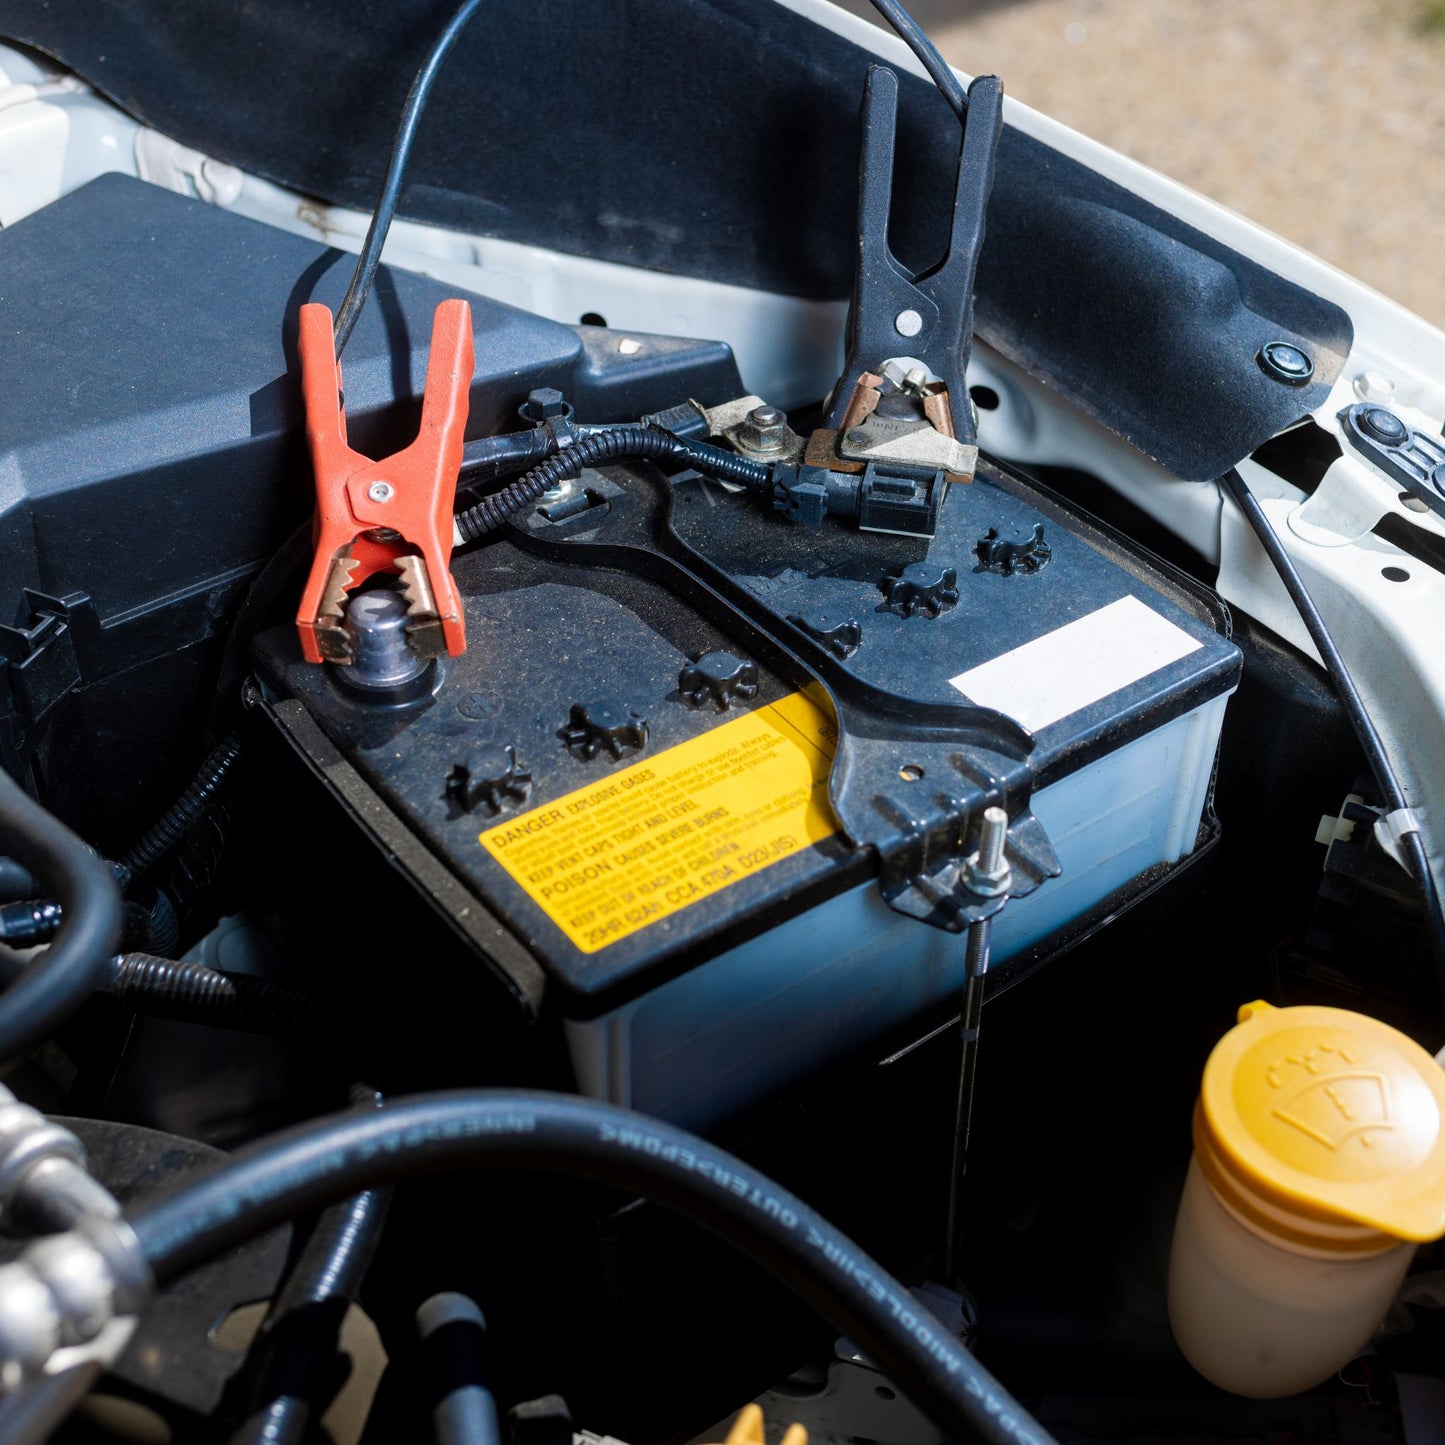 Battery Boost Service Near You: assisting a customer who's car battery is dead.